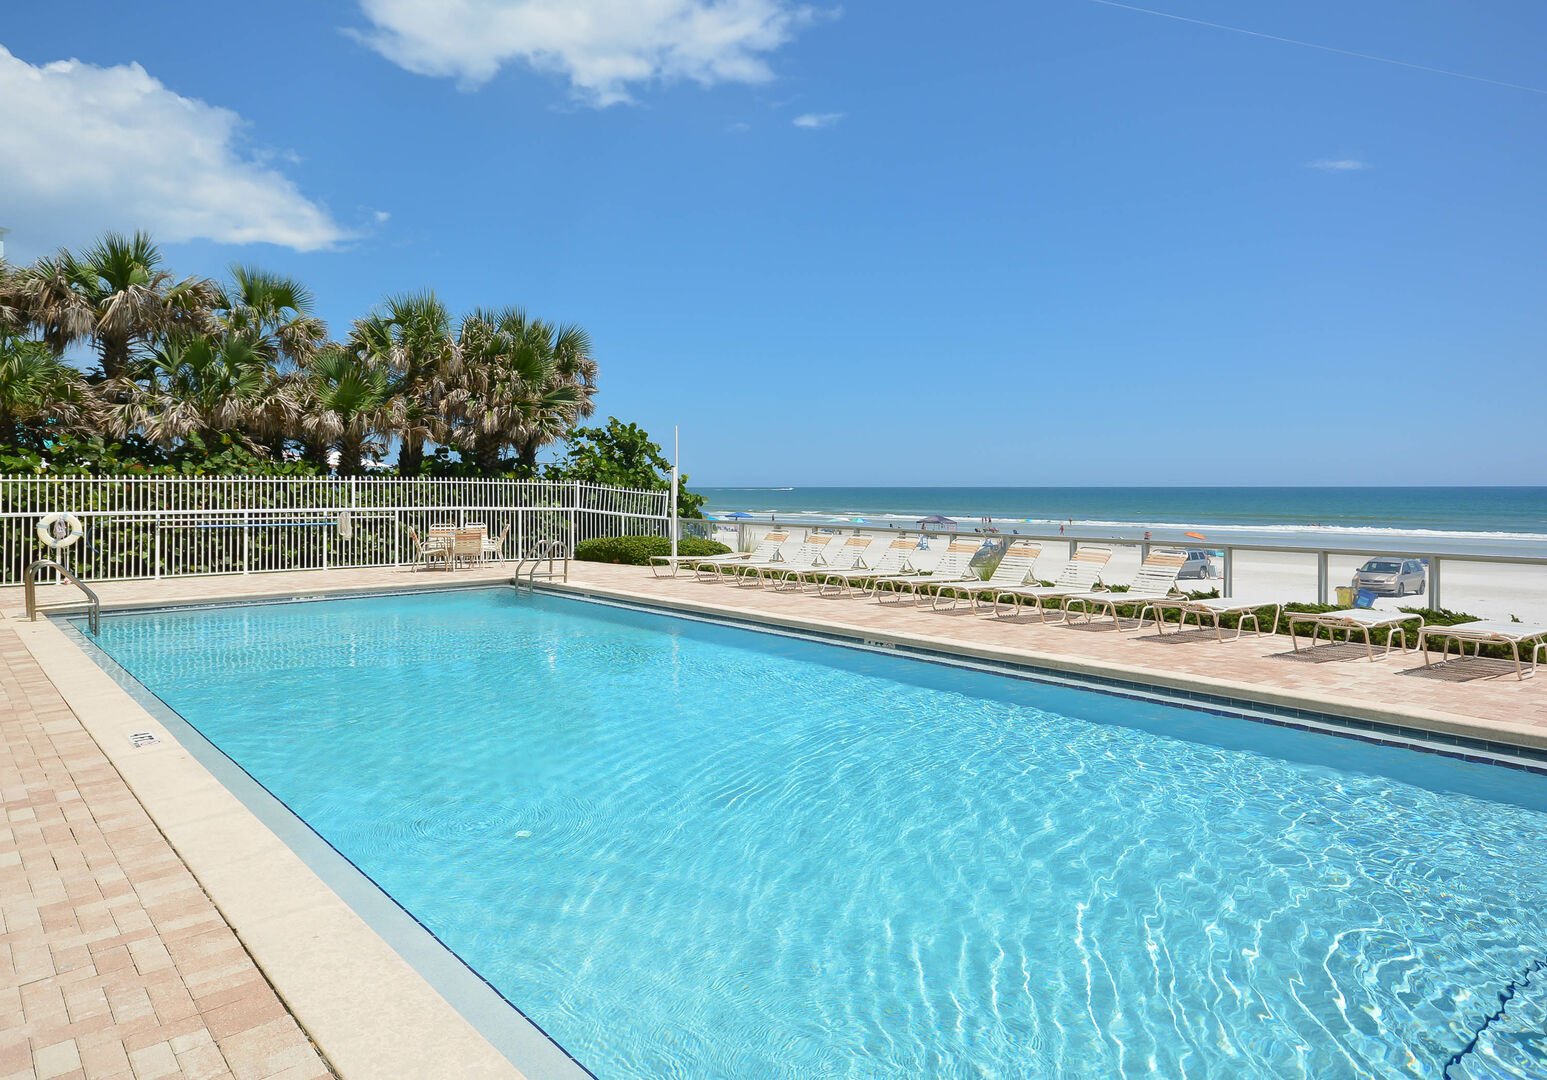 Oceanfront pool. Northern view